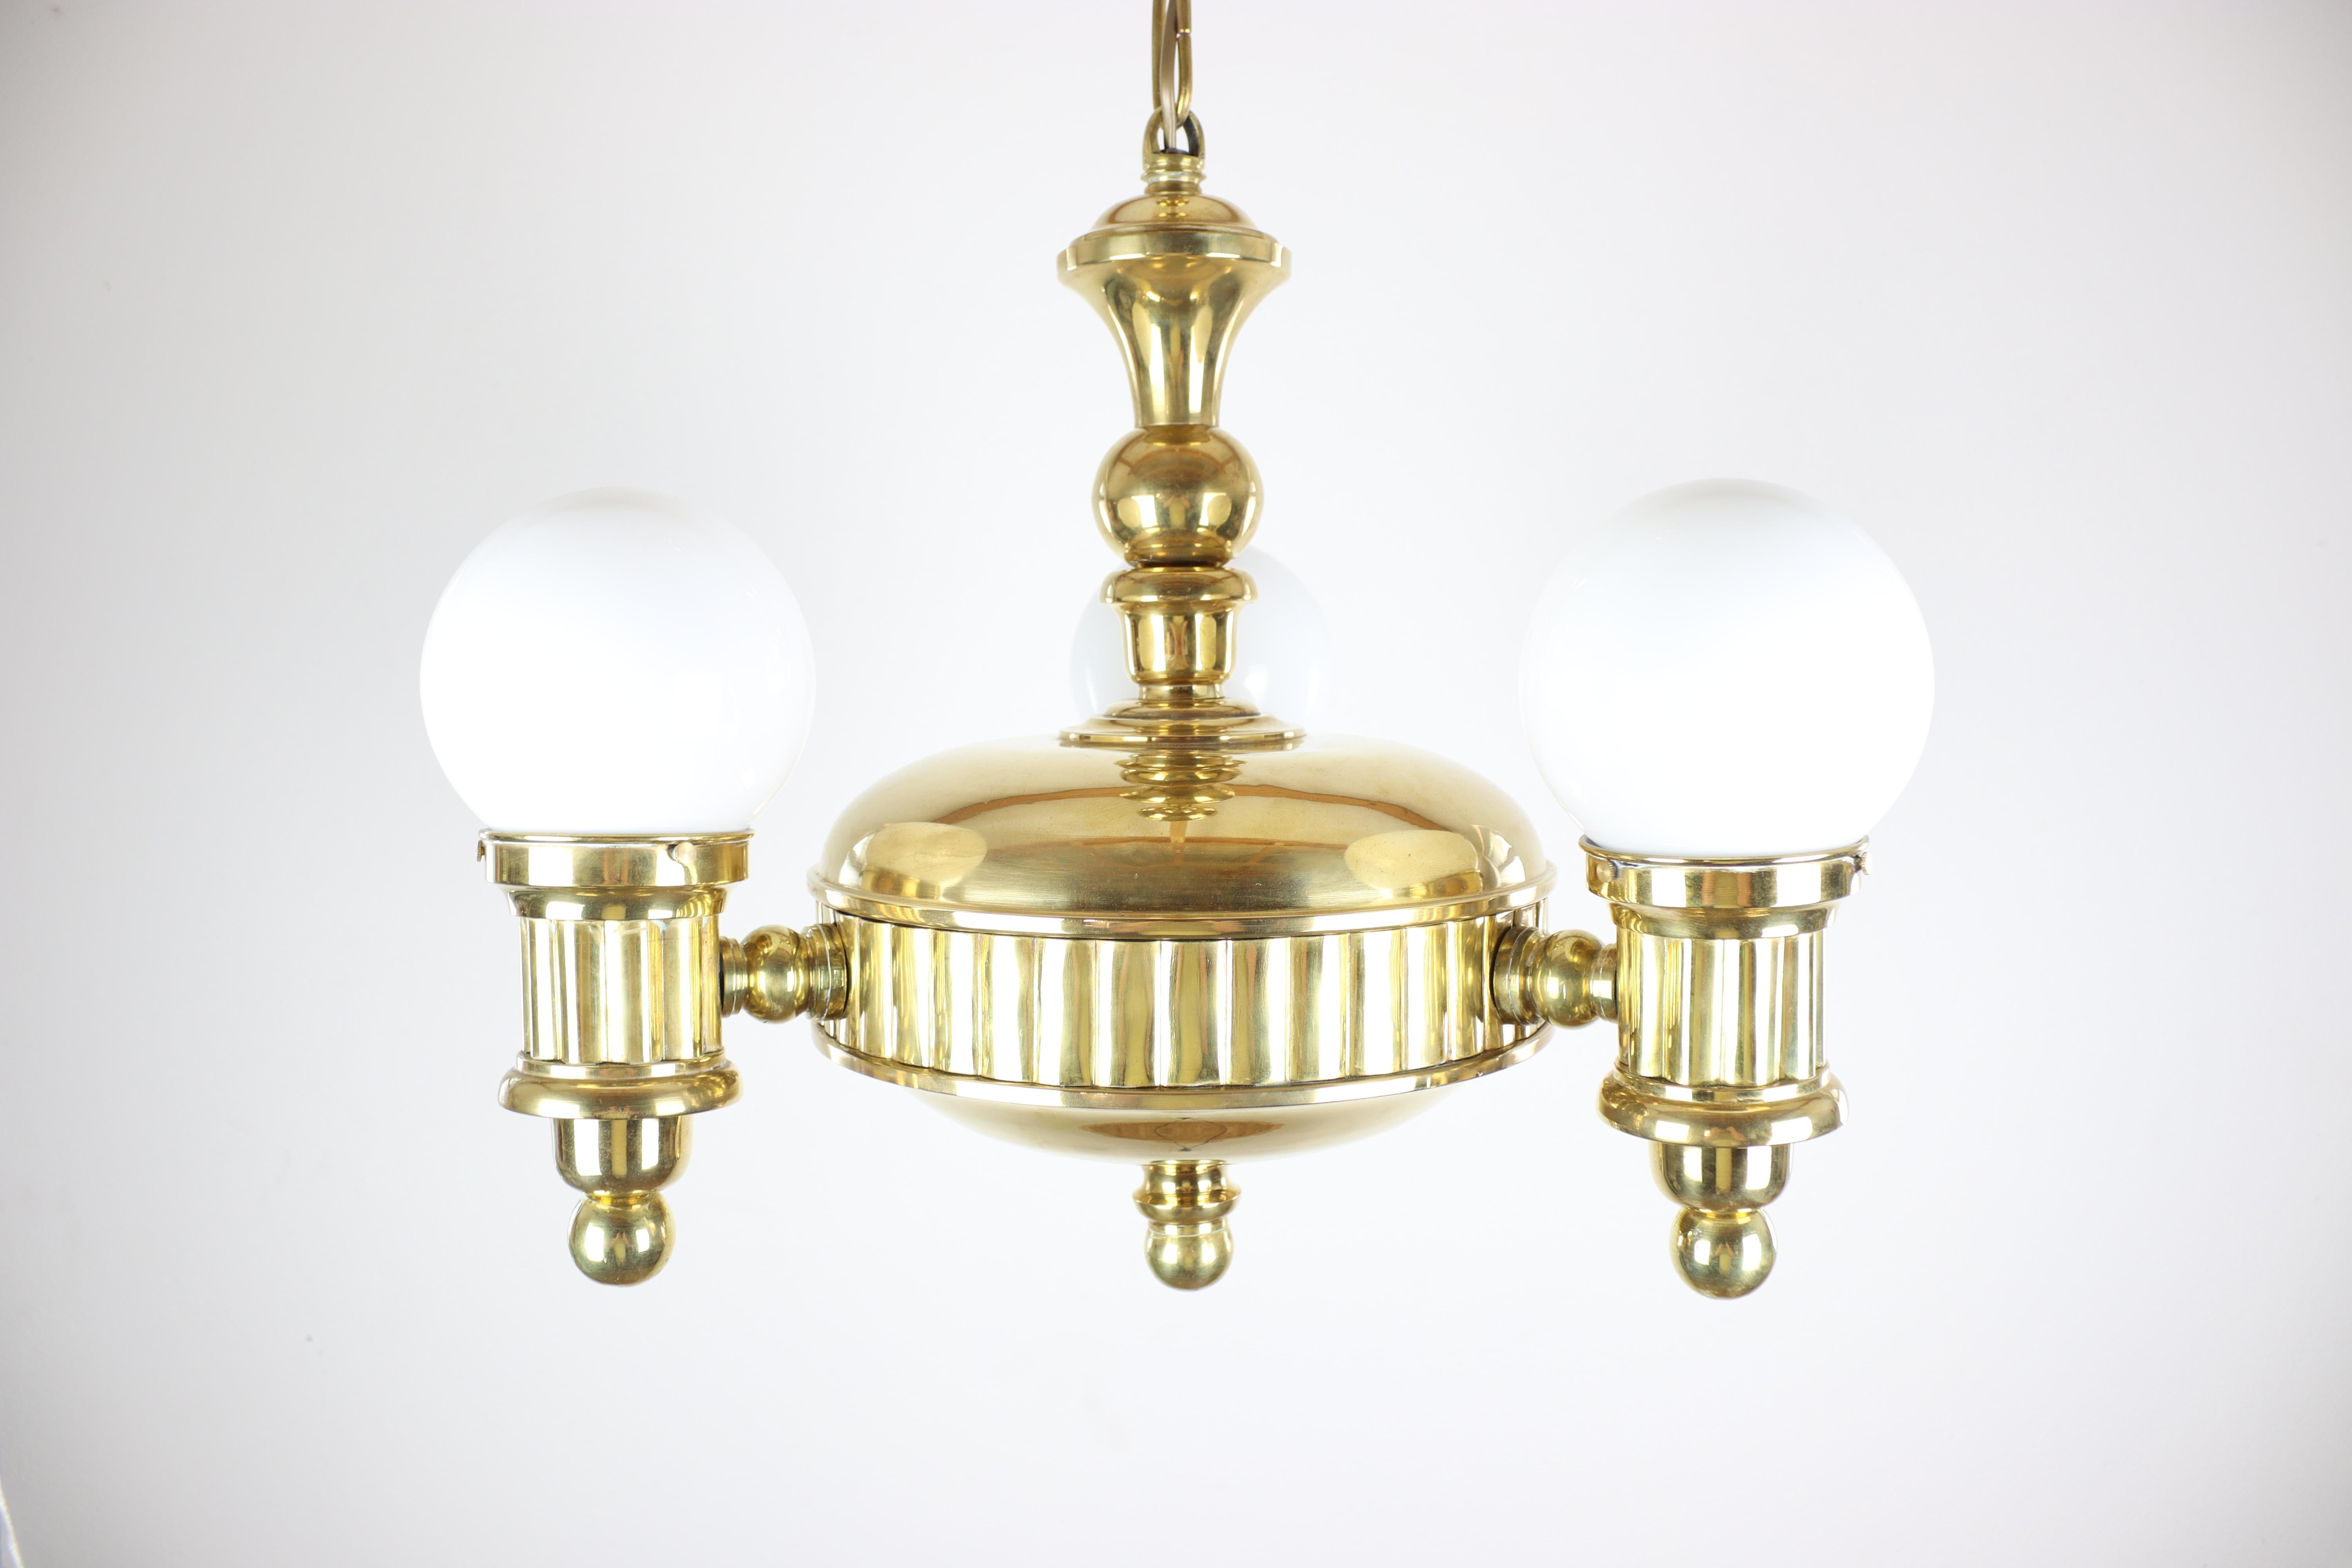 Early 20th Century Exclusive Art Deco Chandelier with Swivel Arms 'Three-Arm Design' For Sale